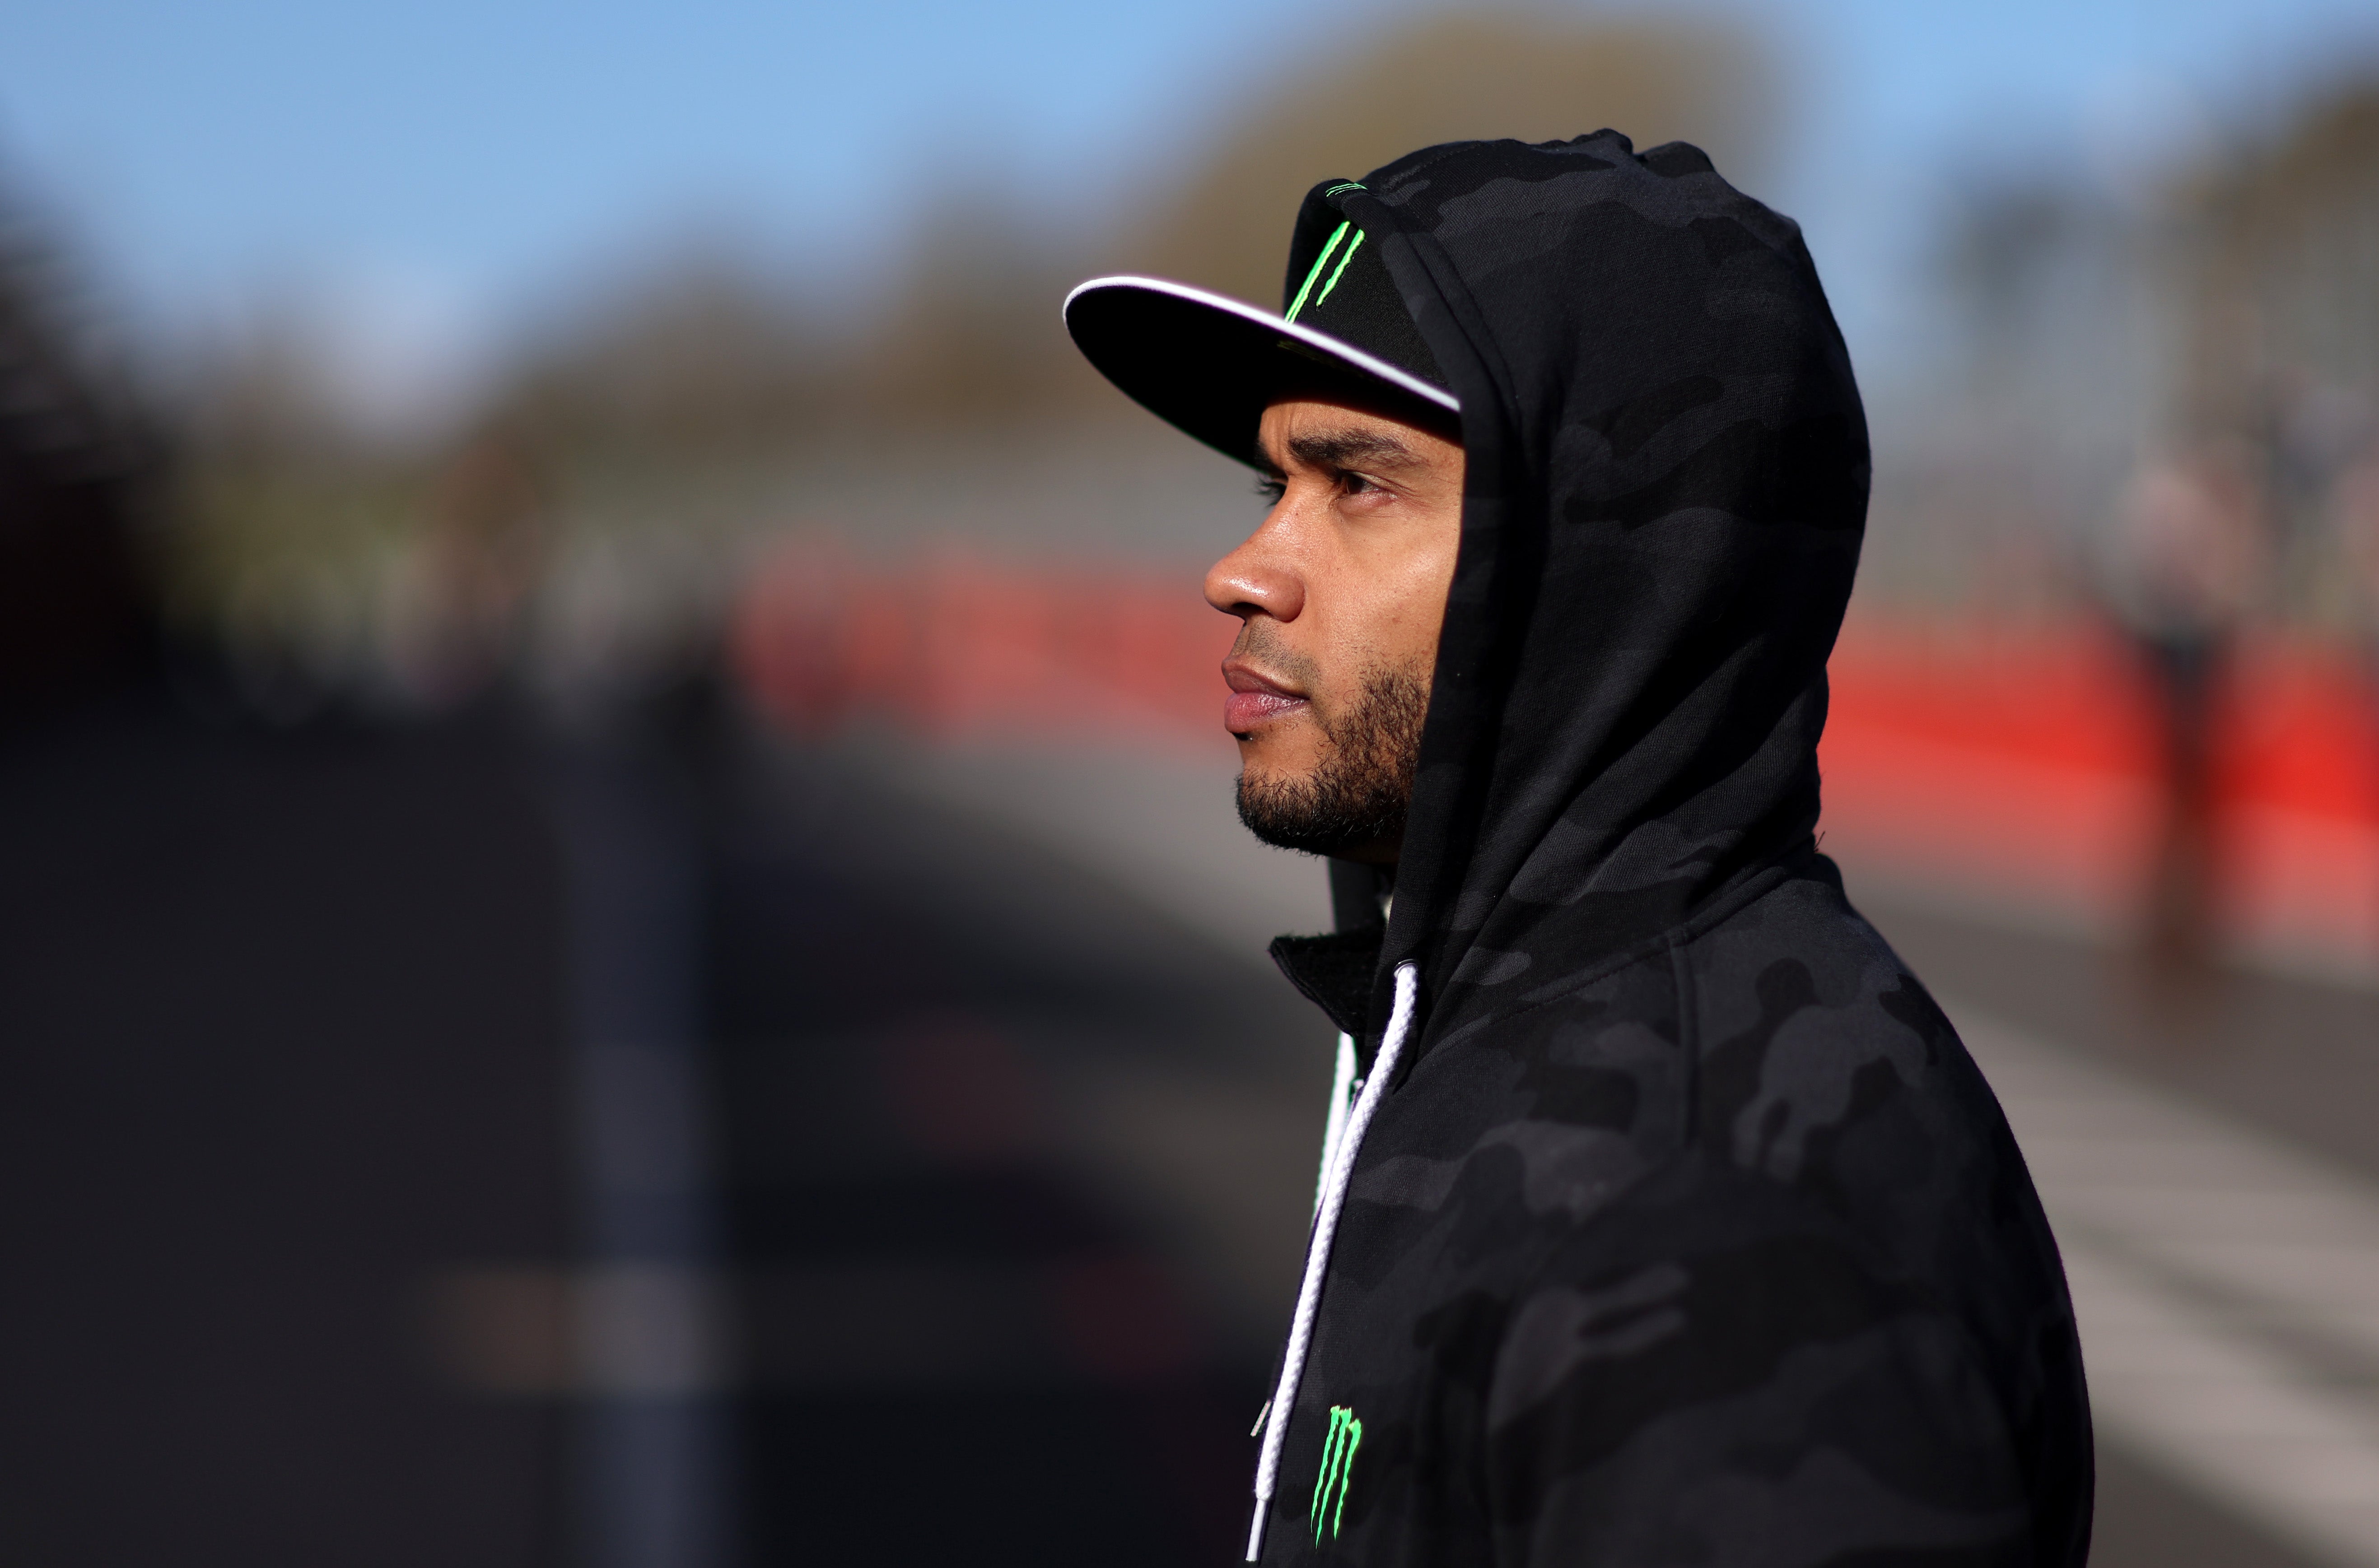 Nicolas Hamilton is determined to make his own way both on and off track